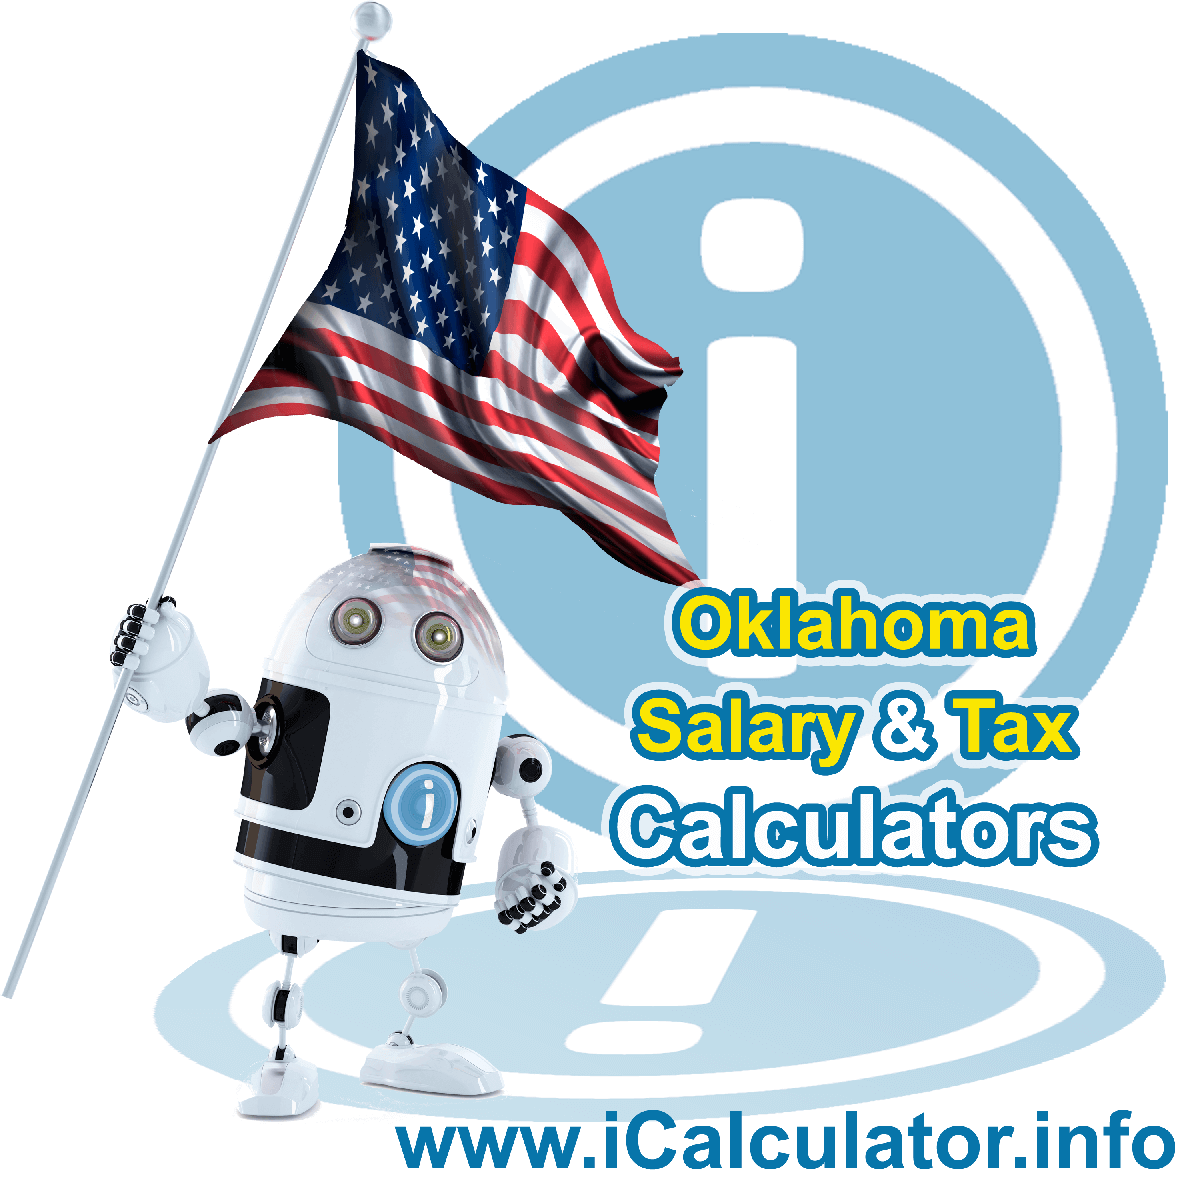 Oklahoma Salary Calculator 2022 | iCalculator™ | The Oklahoma Salary Calculator allows you to quickly calculate your salary after tax including Oklahoma State Tax, Federal State Tax, Medicare Deductions, Social Security, Capital Gains and other income tax and salary deductions complete with supporting Oklahoma state tax tables 